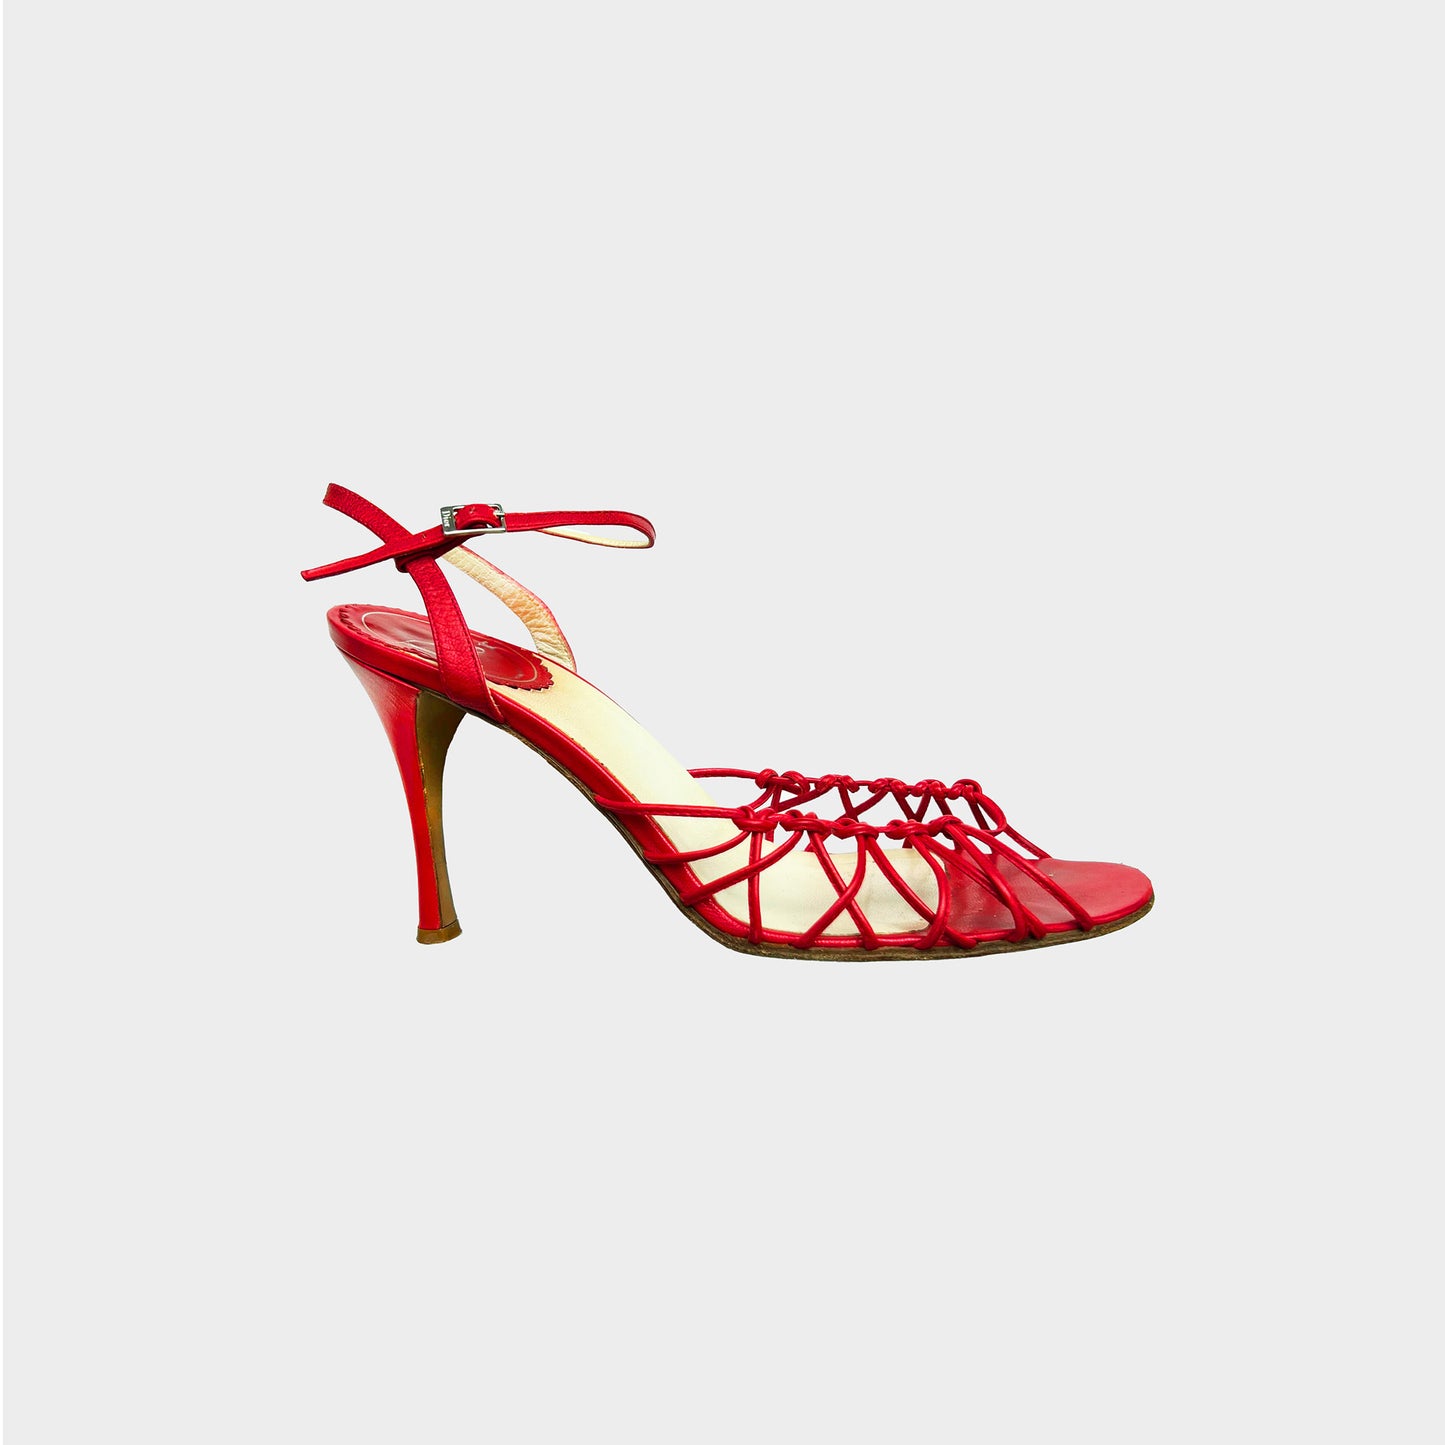 CHRISTIAN DIOR 1990S RED STRAPPY CAGED HEELS